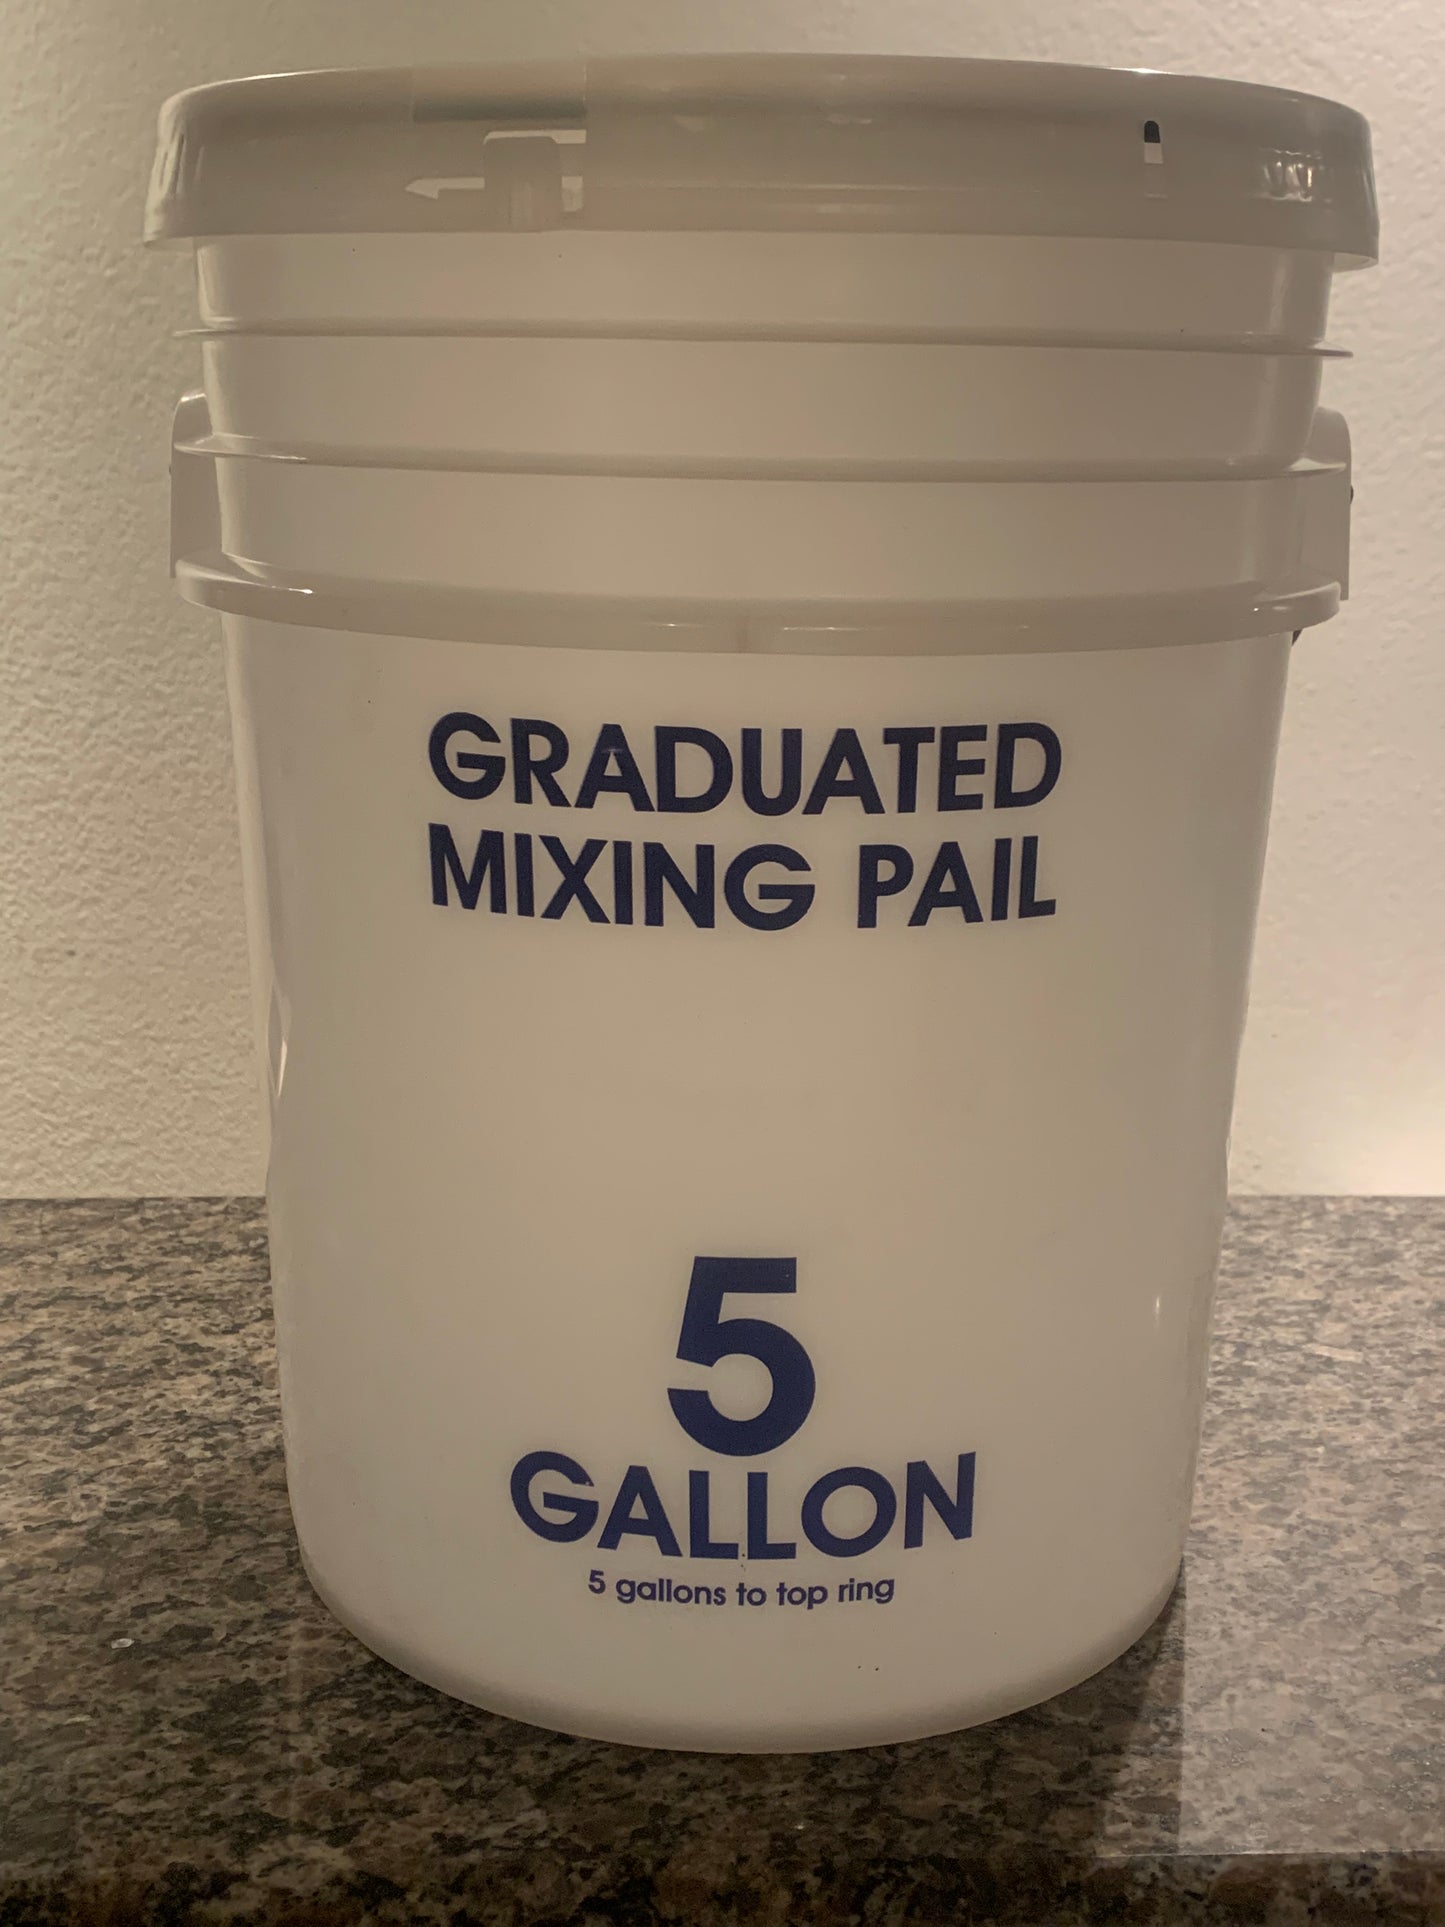 Graduated mixing pail 5 gallon with sealing lid